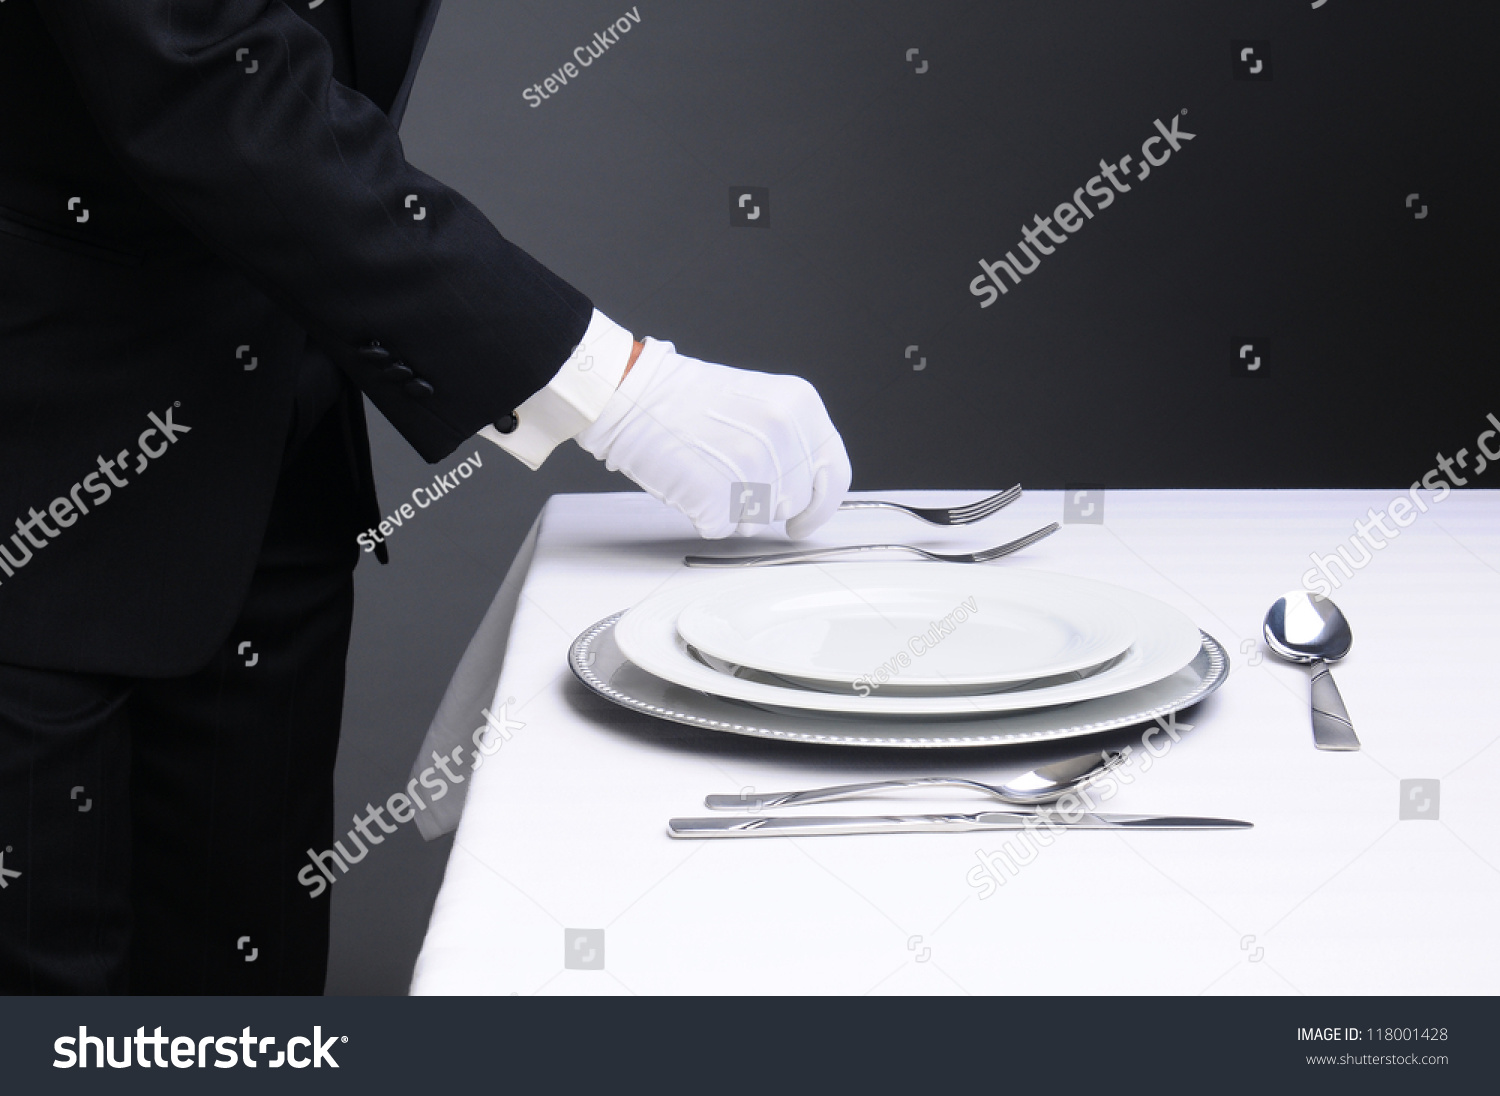 Closeup of a waiter in a tuxedo setting a formal dinner table. Horizontal format on a light to dark gray background. Man is unrecognizable. #118001428